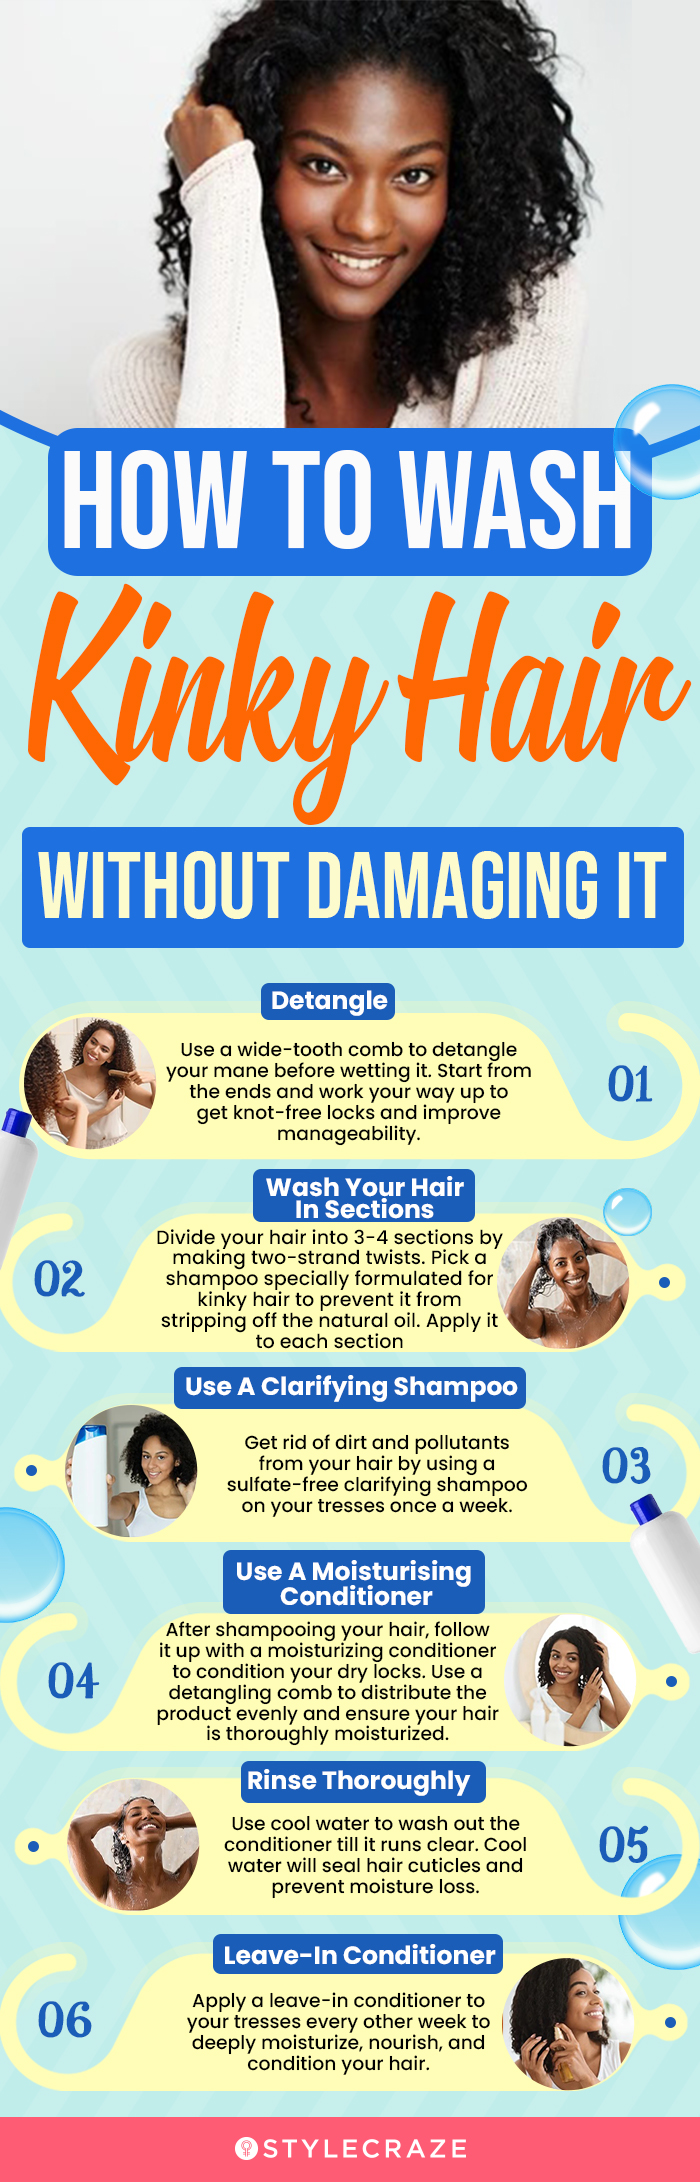 Tips For Maintaining Healthy Hair While Using A Flat Iron (infographic)